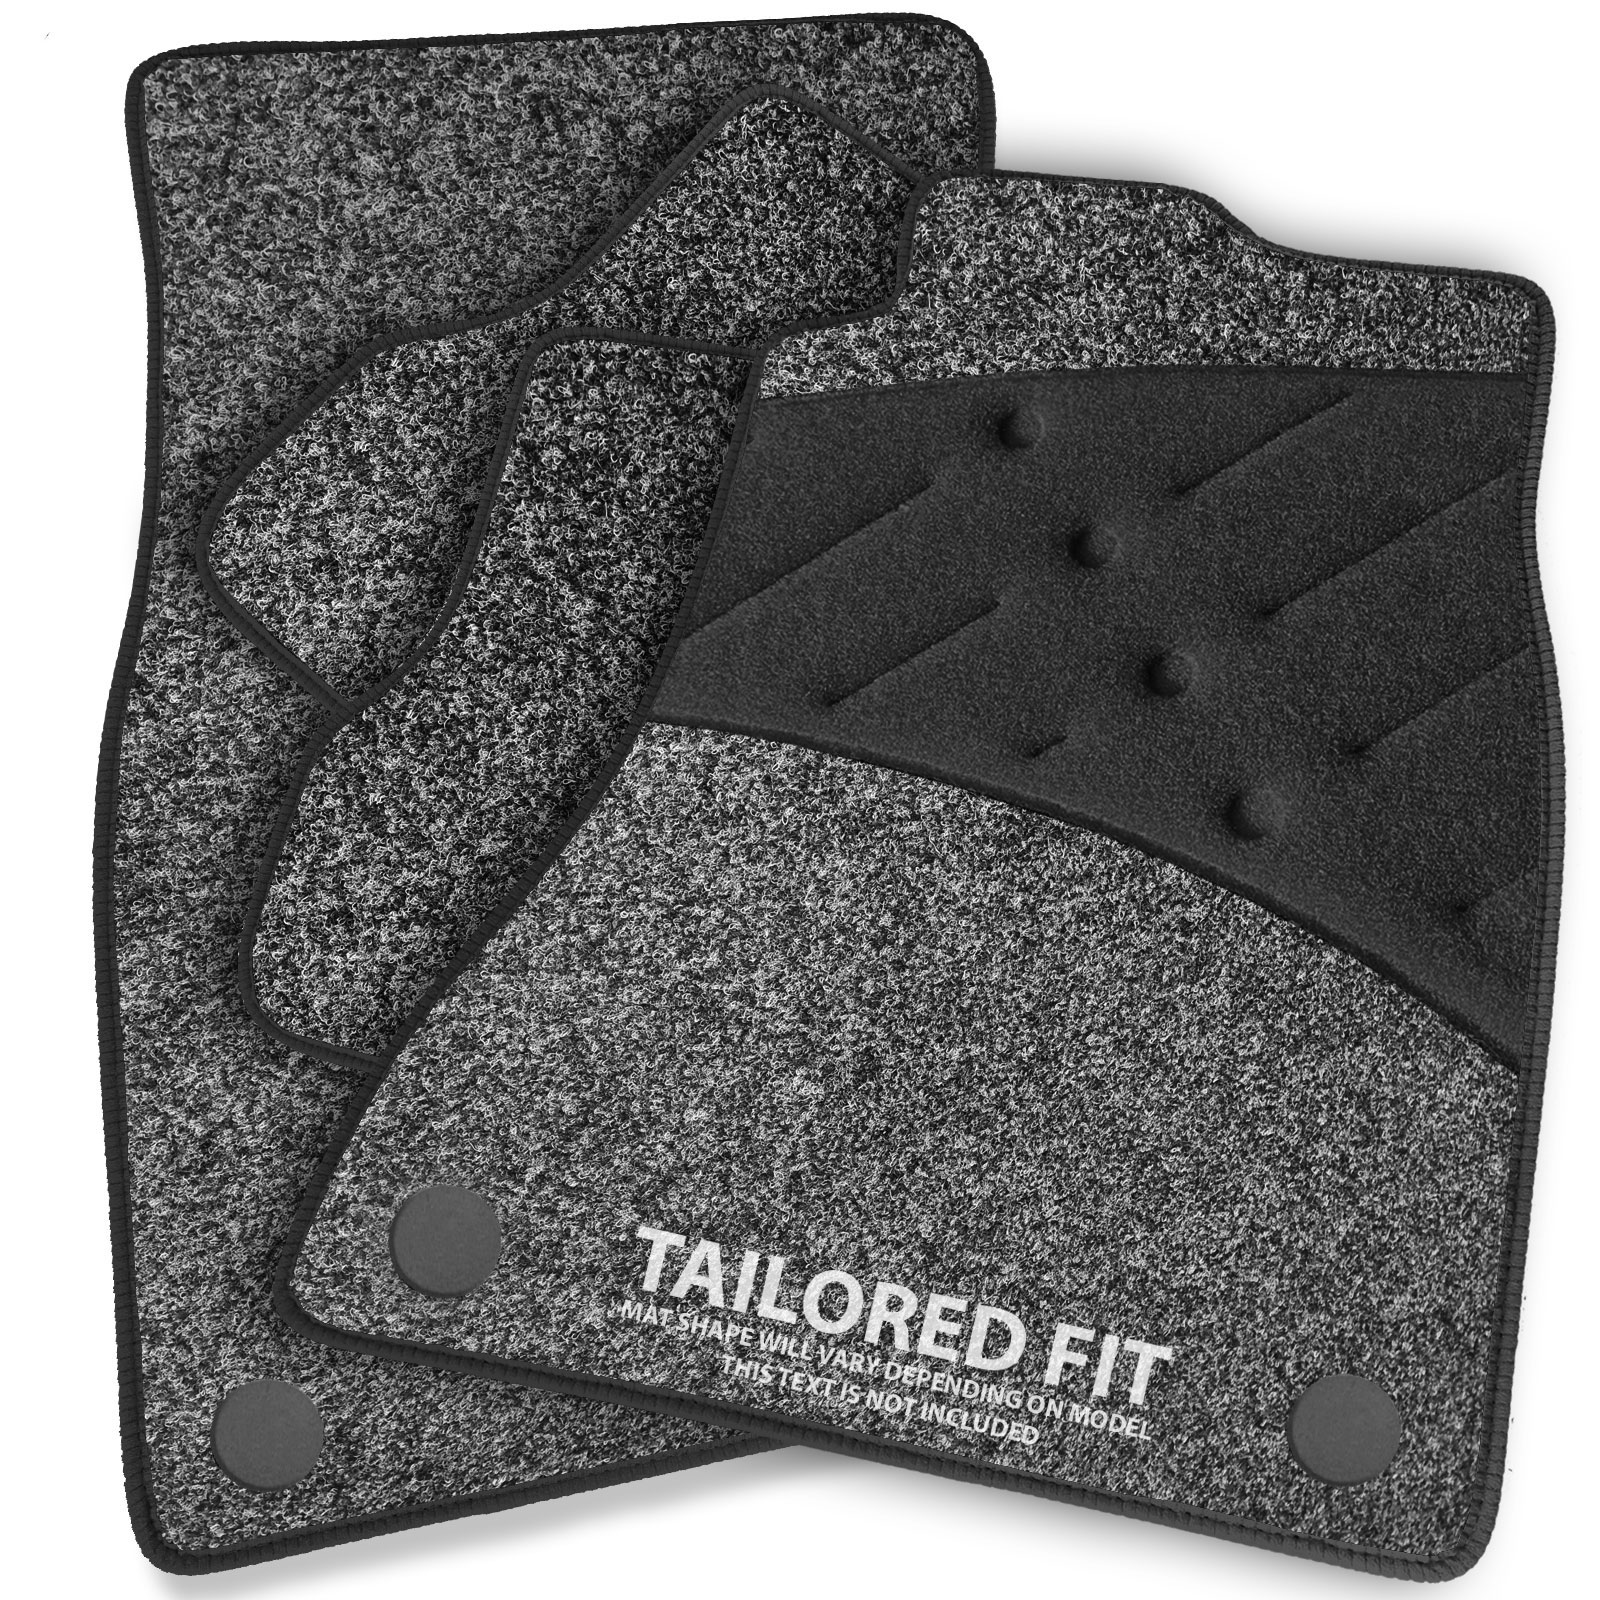 1998-2000 To Fit Fits For Nissan Almera Tailored Car Mats